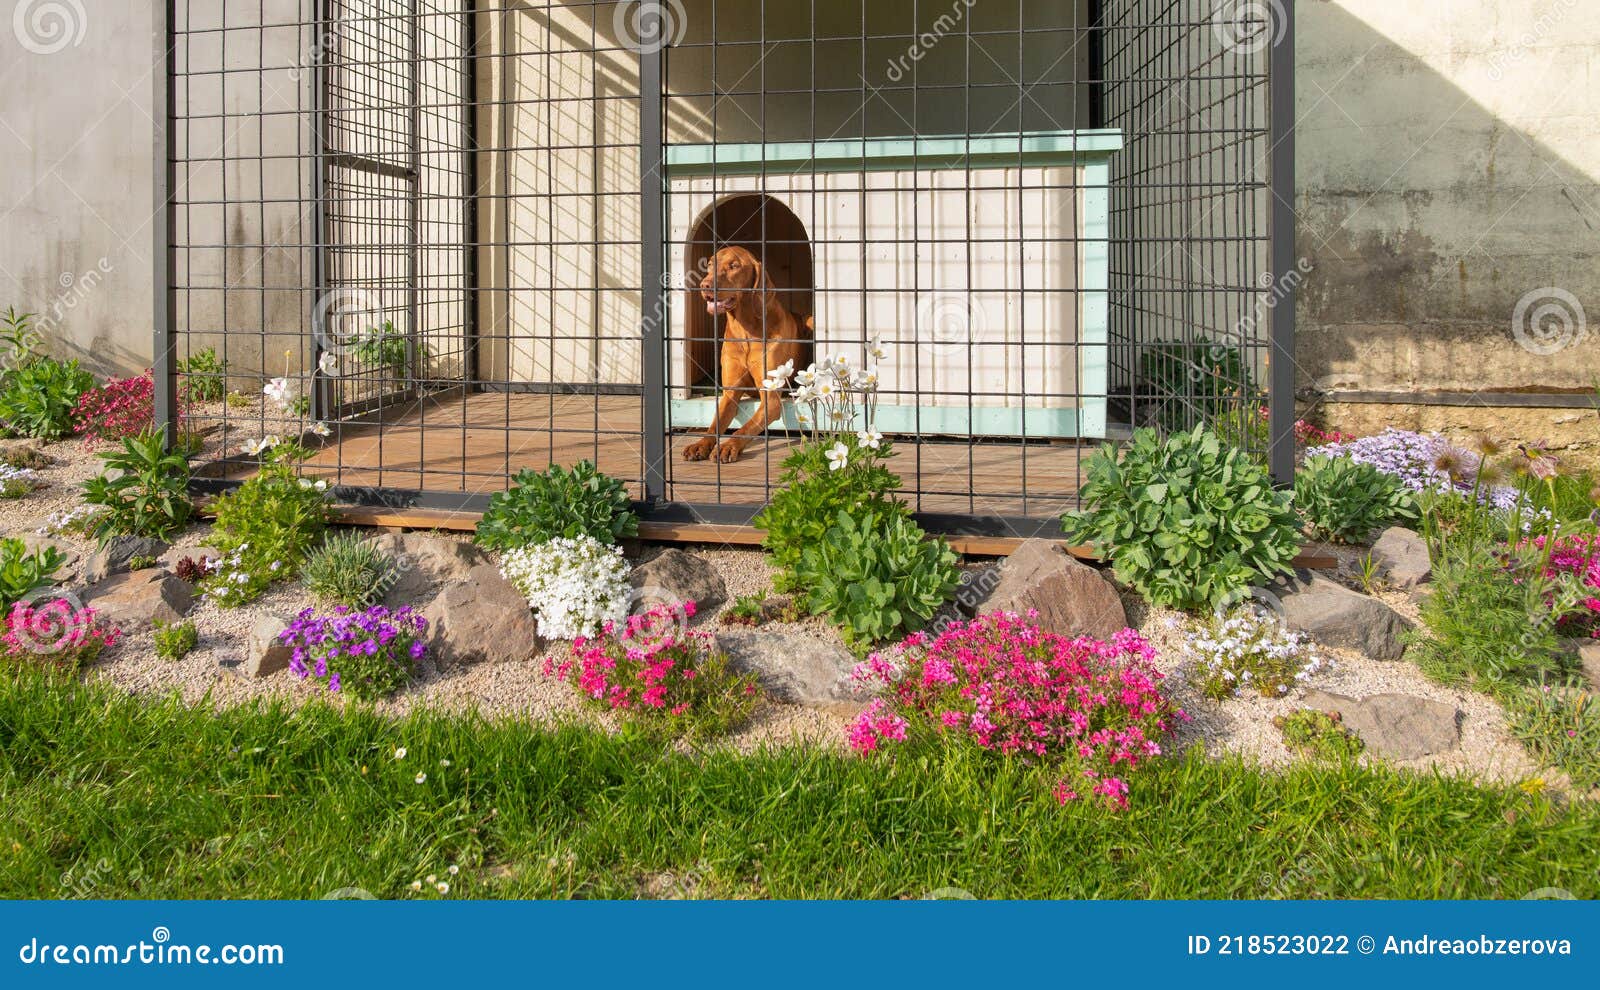 cute vizsla hunting dog in his dog kennel with beautifuly landscaped surroundings.